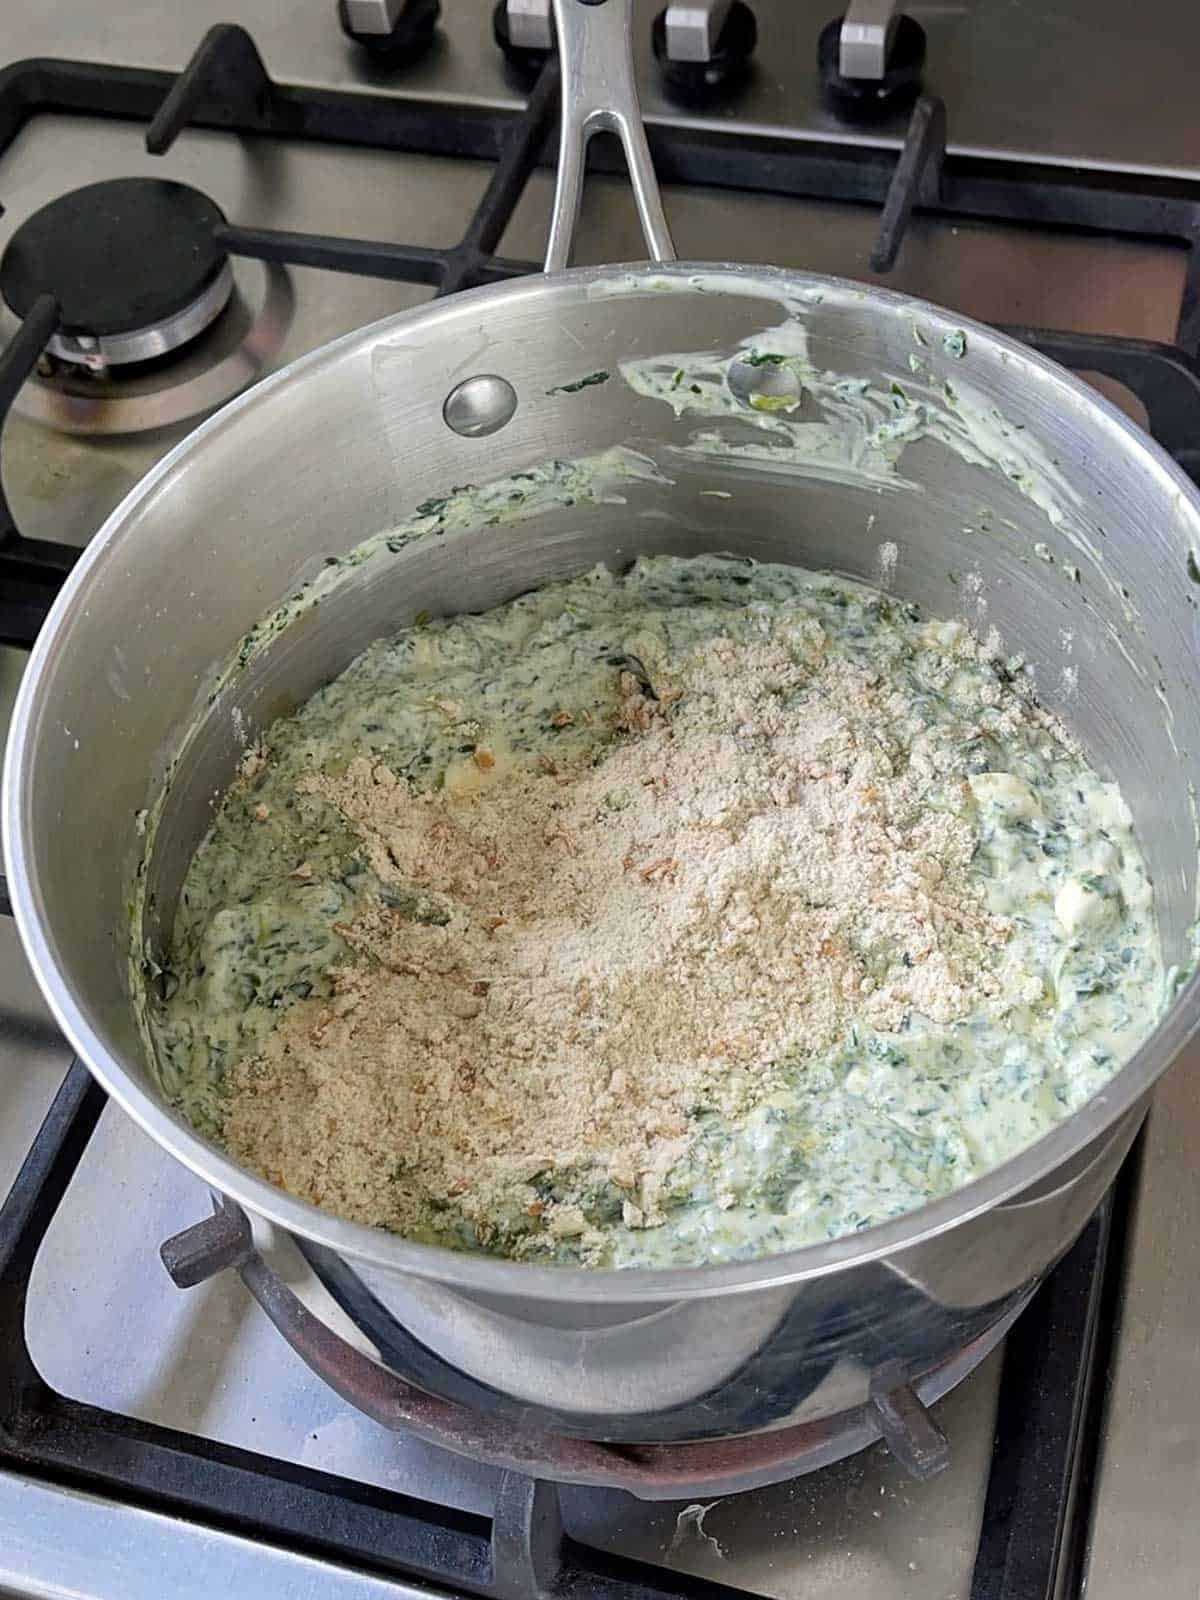 Creamy Spinach dip being made in a saucepan on the stove top.